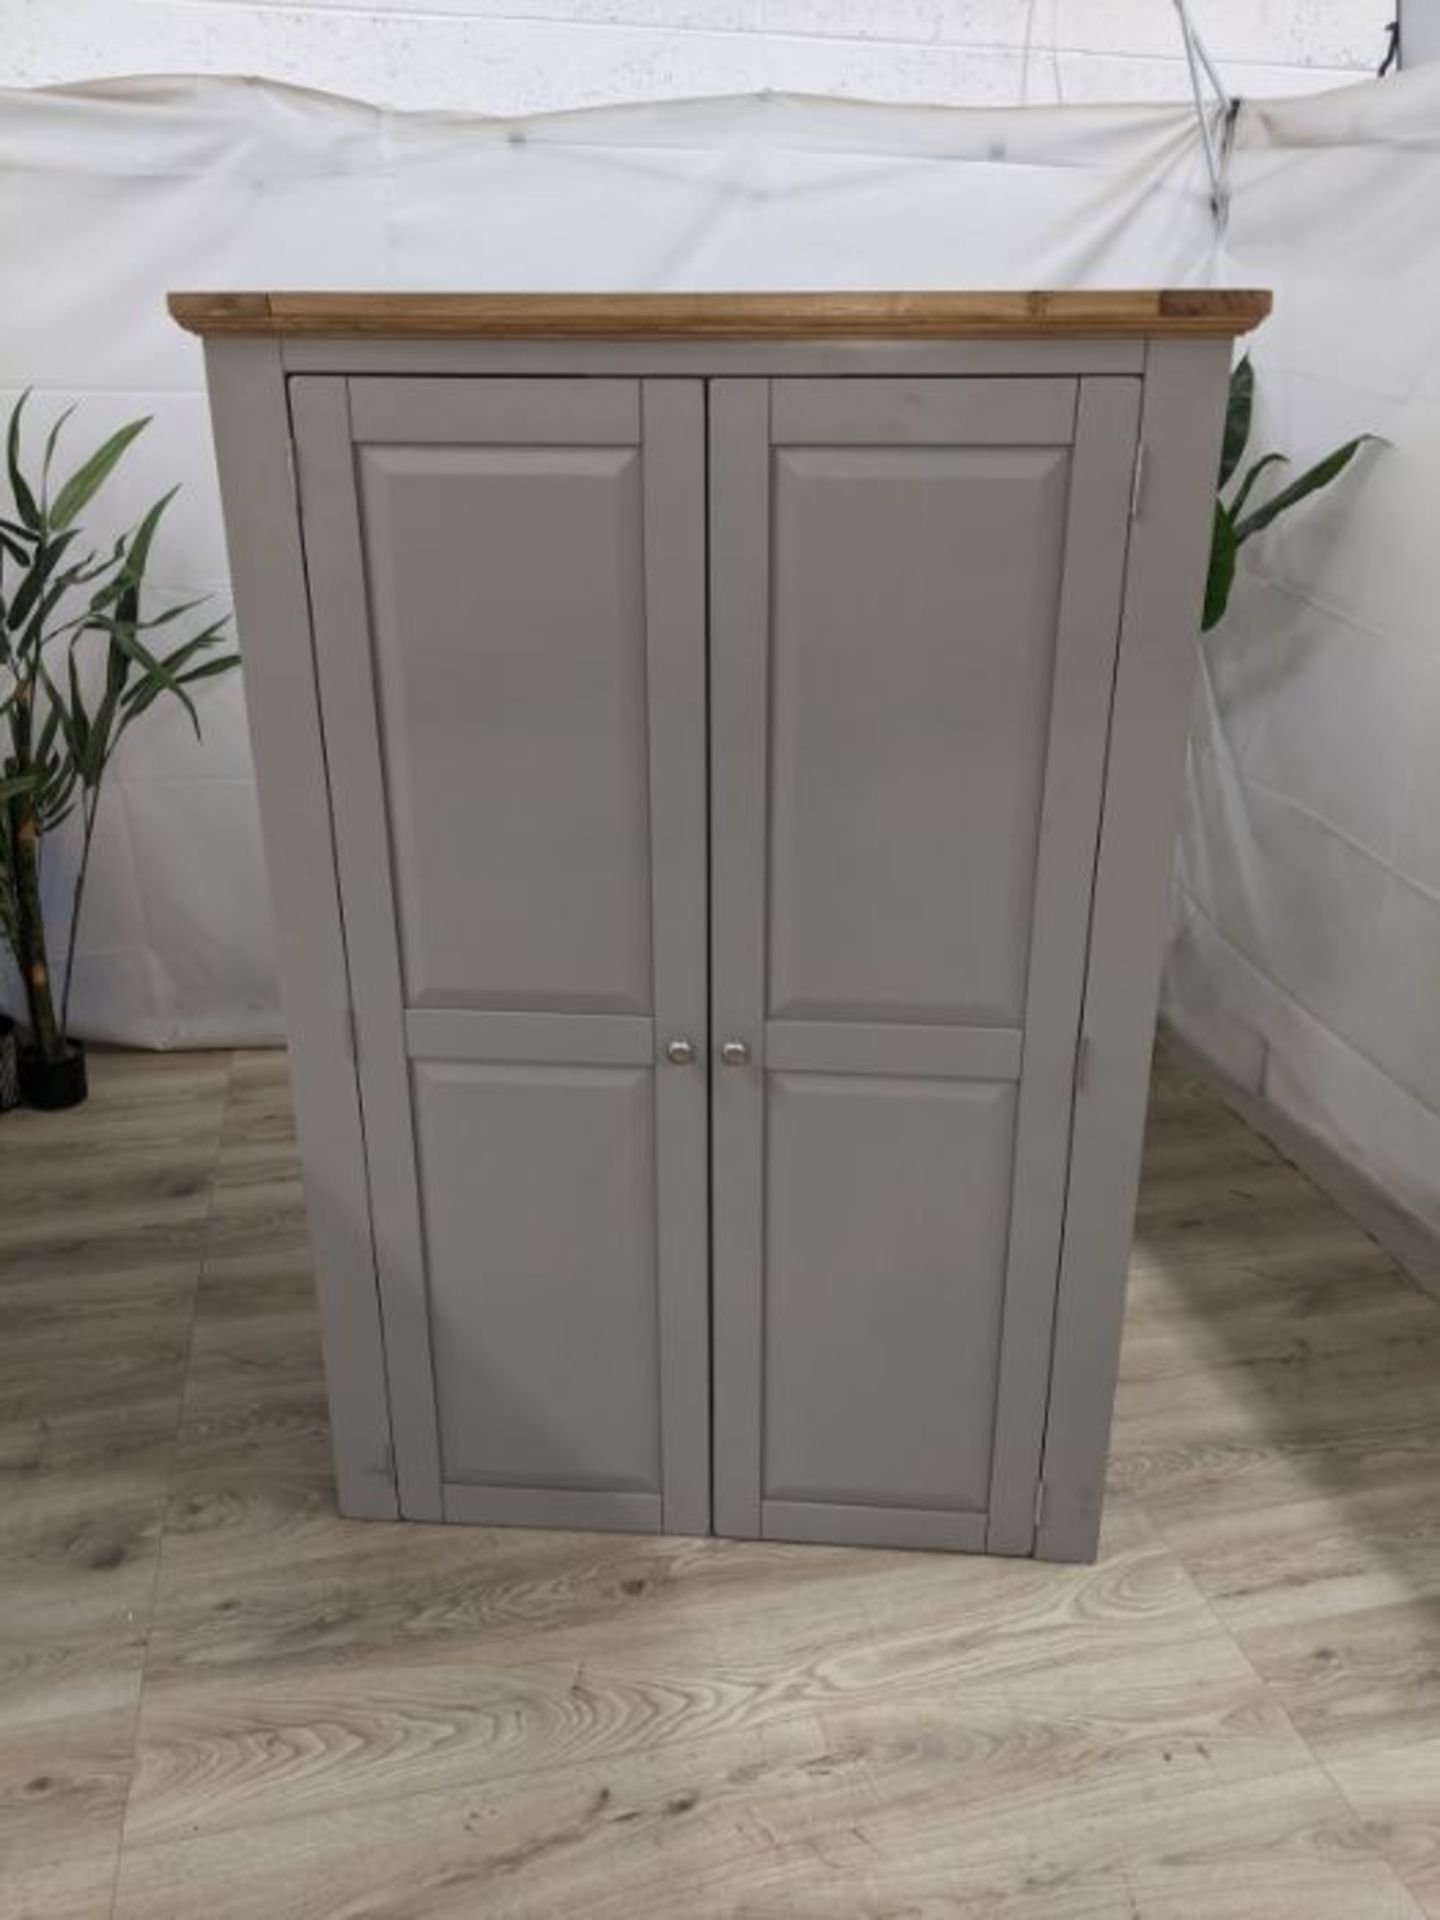 Oak Furnitureland St Ives Natural Oak And Light Grey Painted Double Wardrobe RRP ?694.99 The St Ives - Image 2 of 7